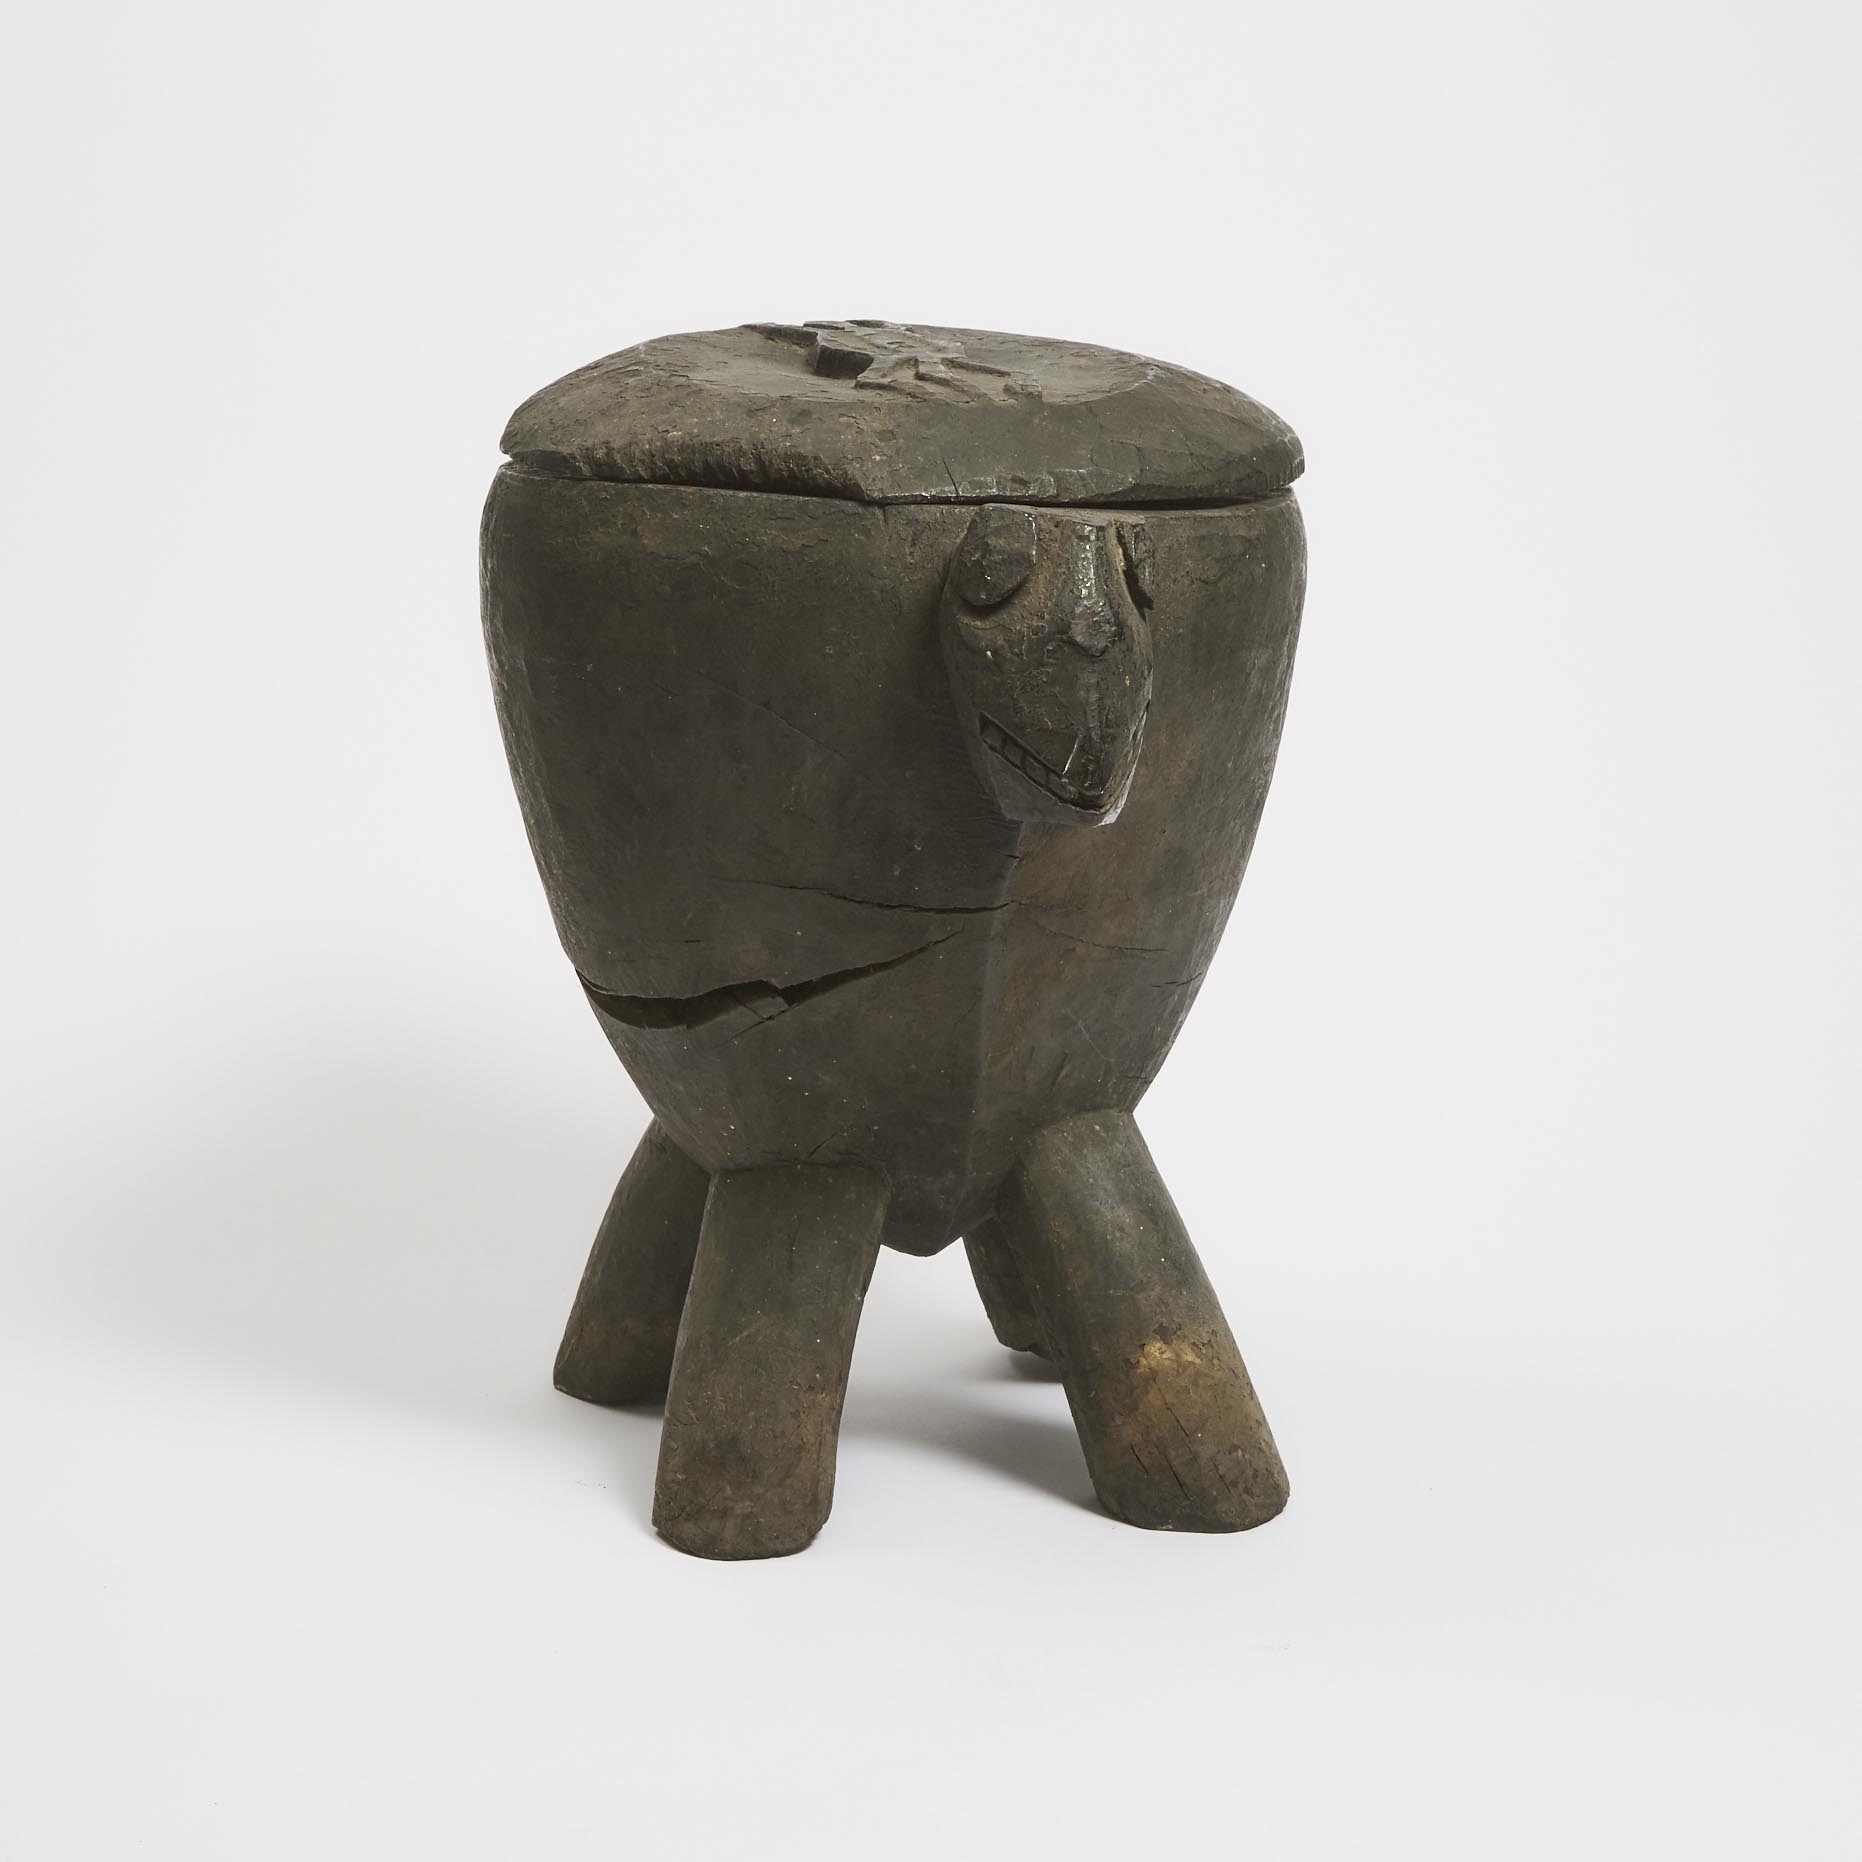 Bontoc Zoomorphic Ceremonial Lidded Box, Luzon Island, Philippines, late 19th to early 20th ceutry 